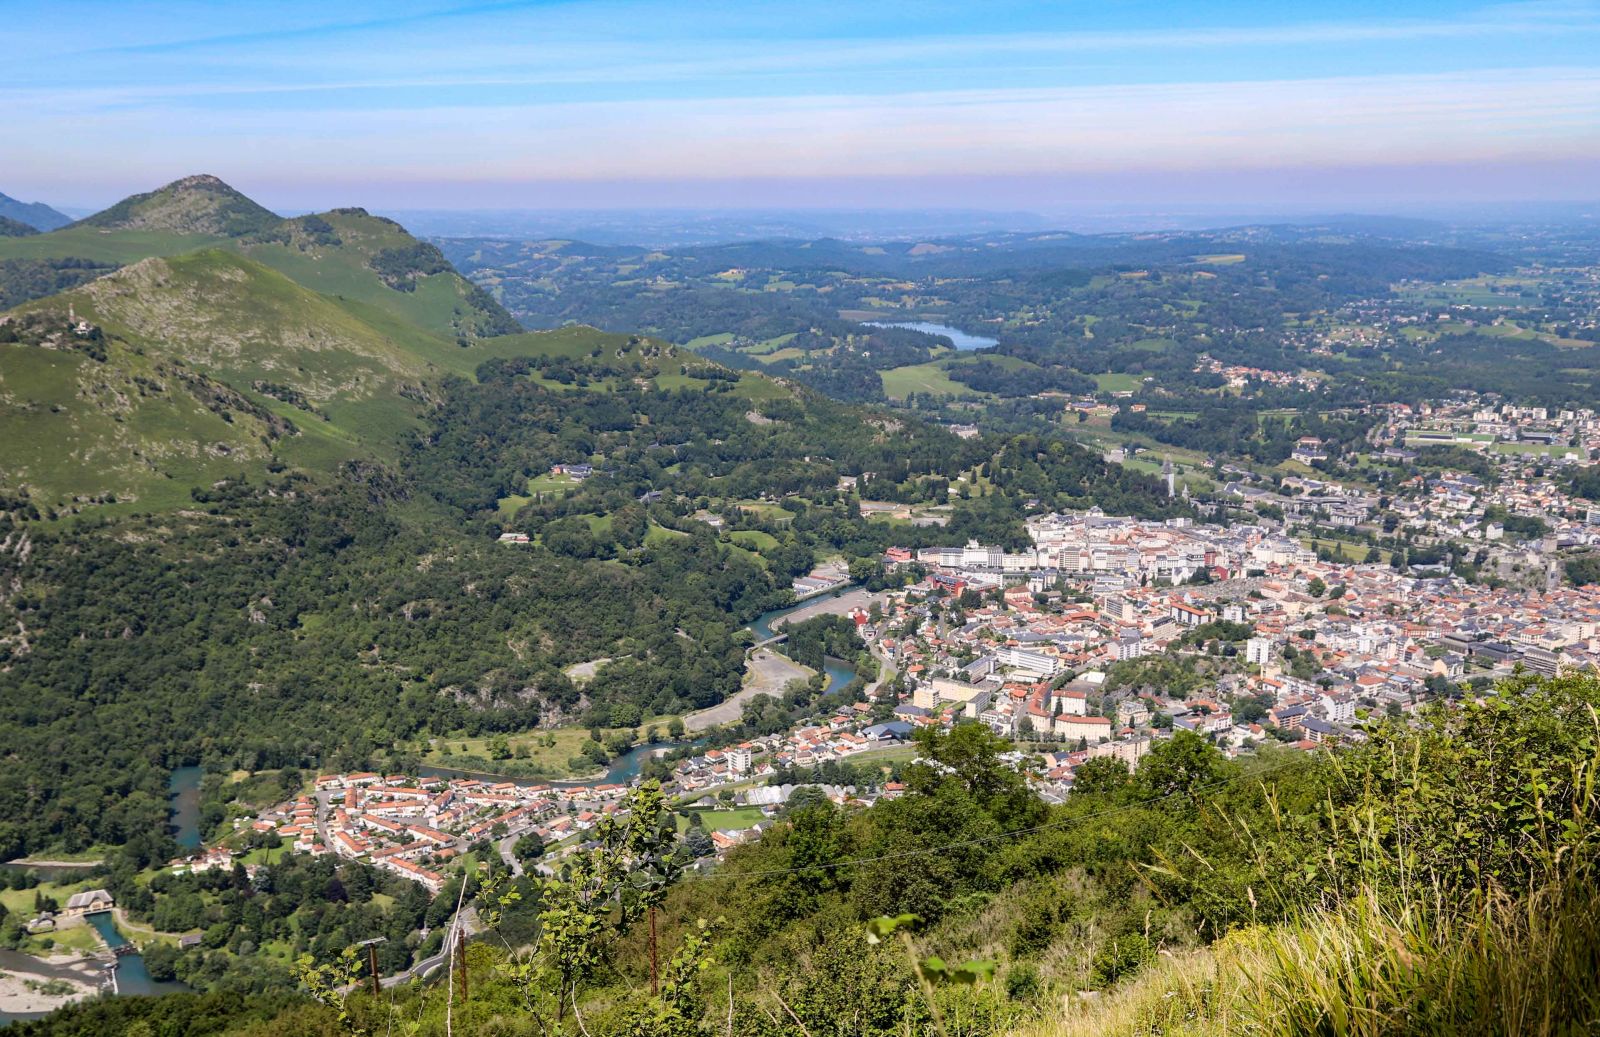 24h in Lourdes: discover the sacred city at th ...